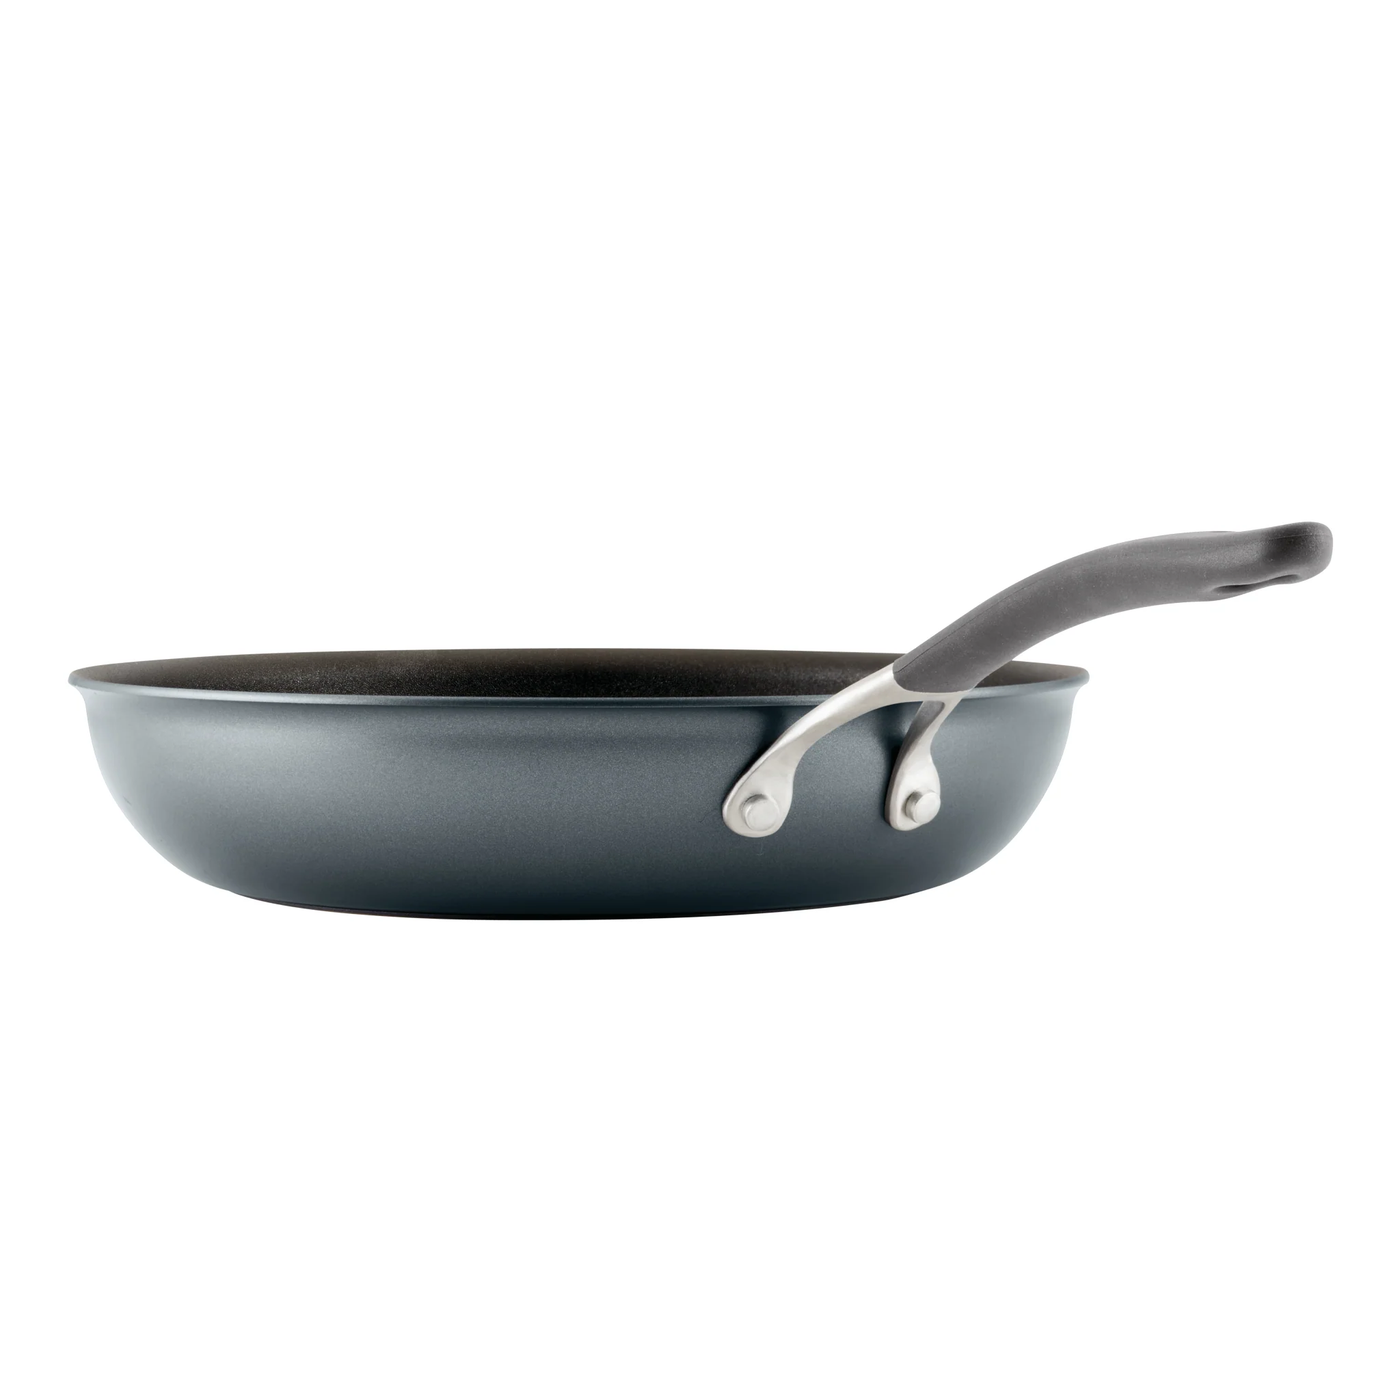 Side Profile of the Circulon ScratchDefense Extreme Non-Stick Induction Frying Pan 